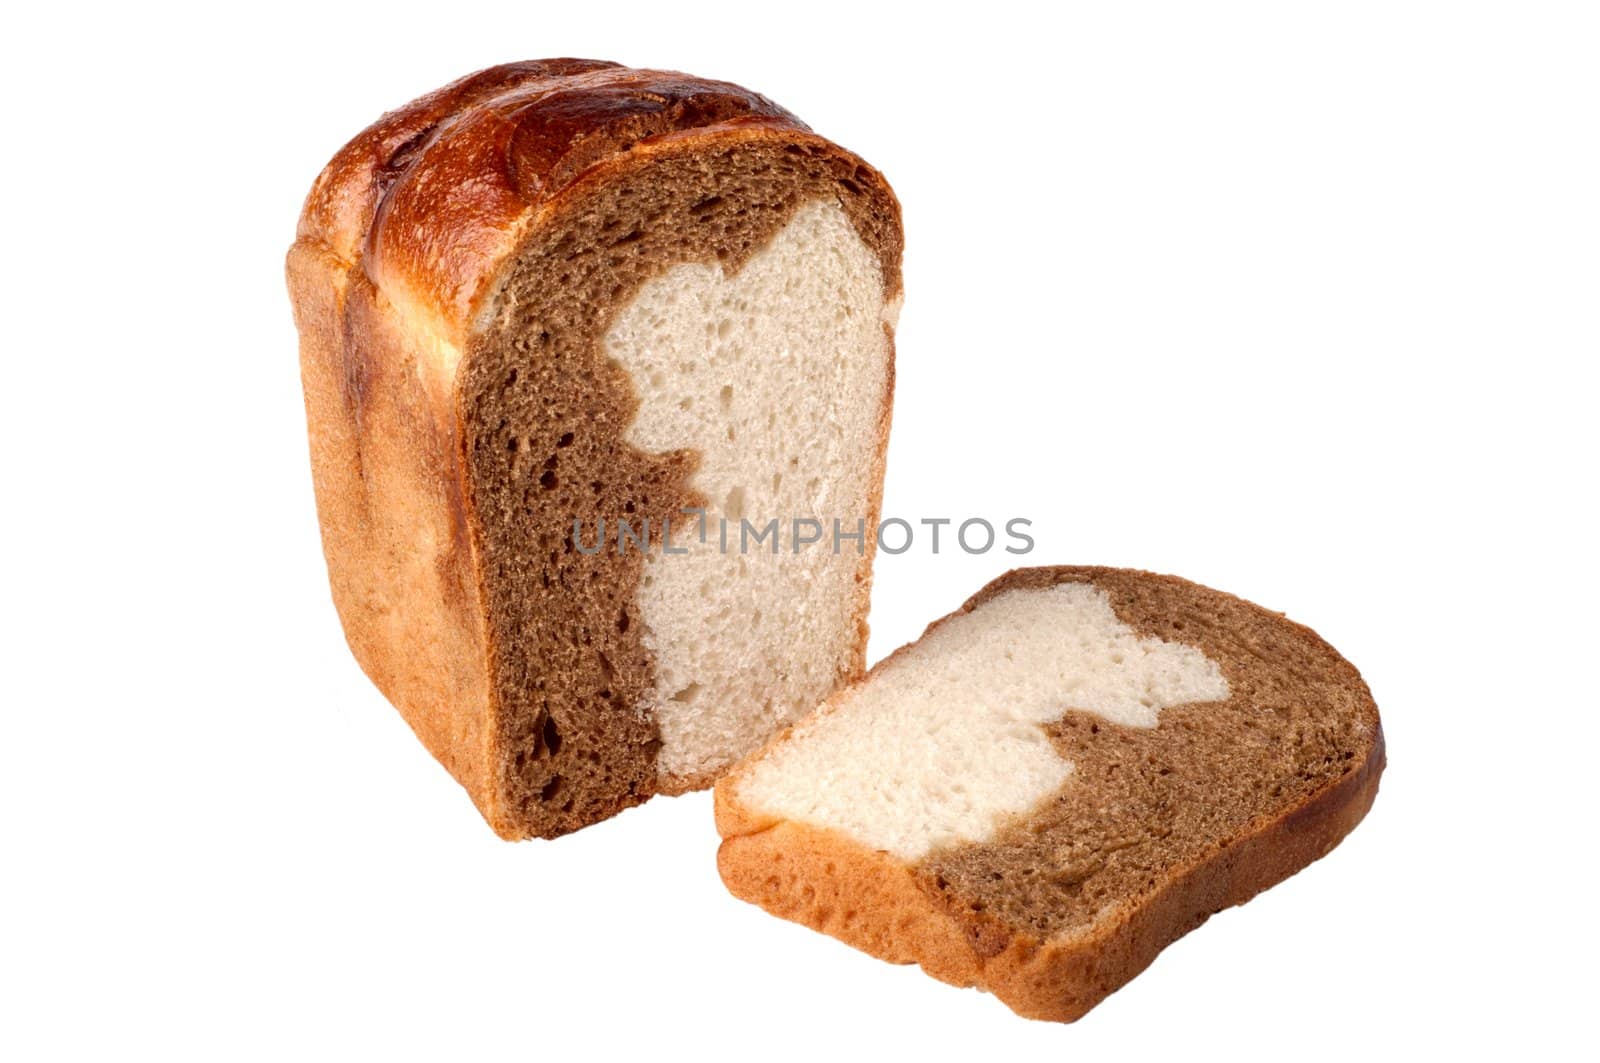 bread made from various types of flour